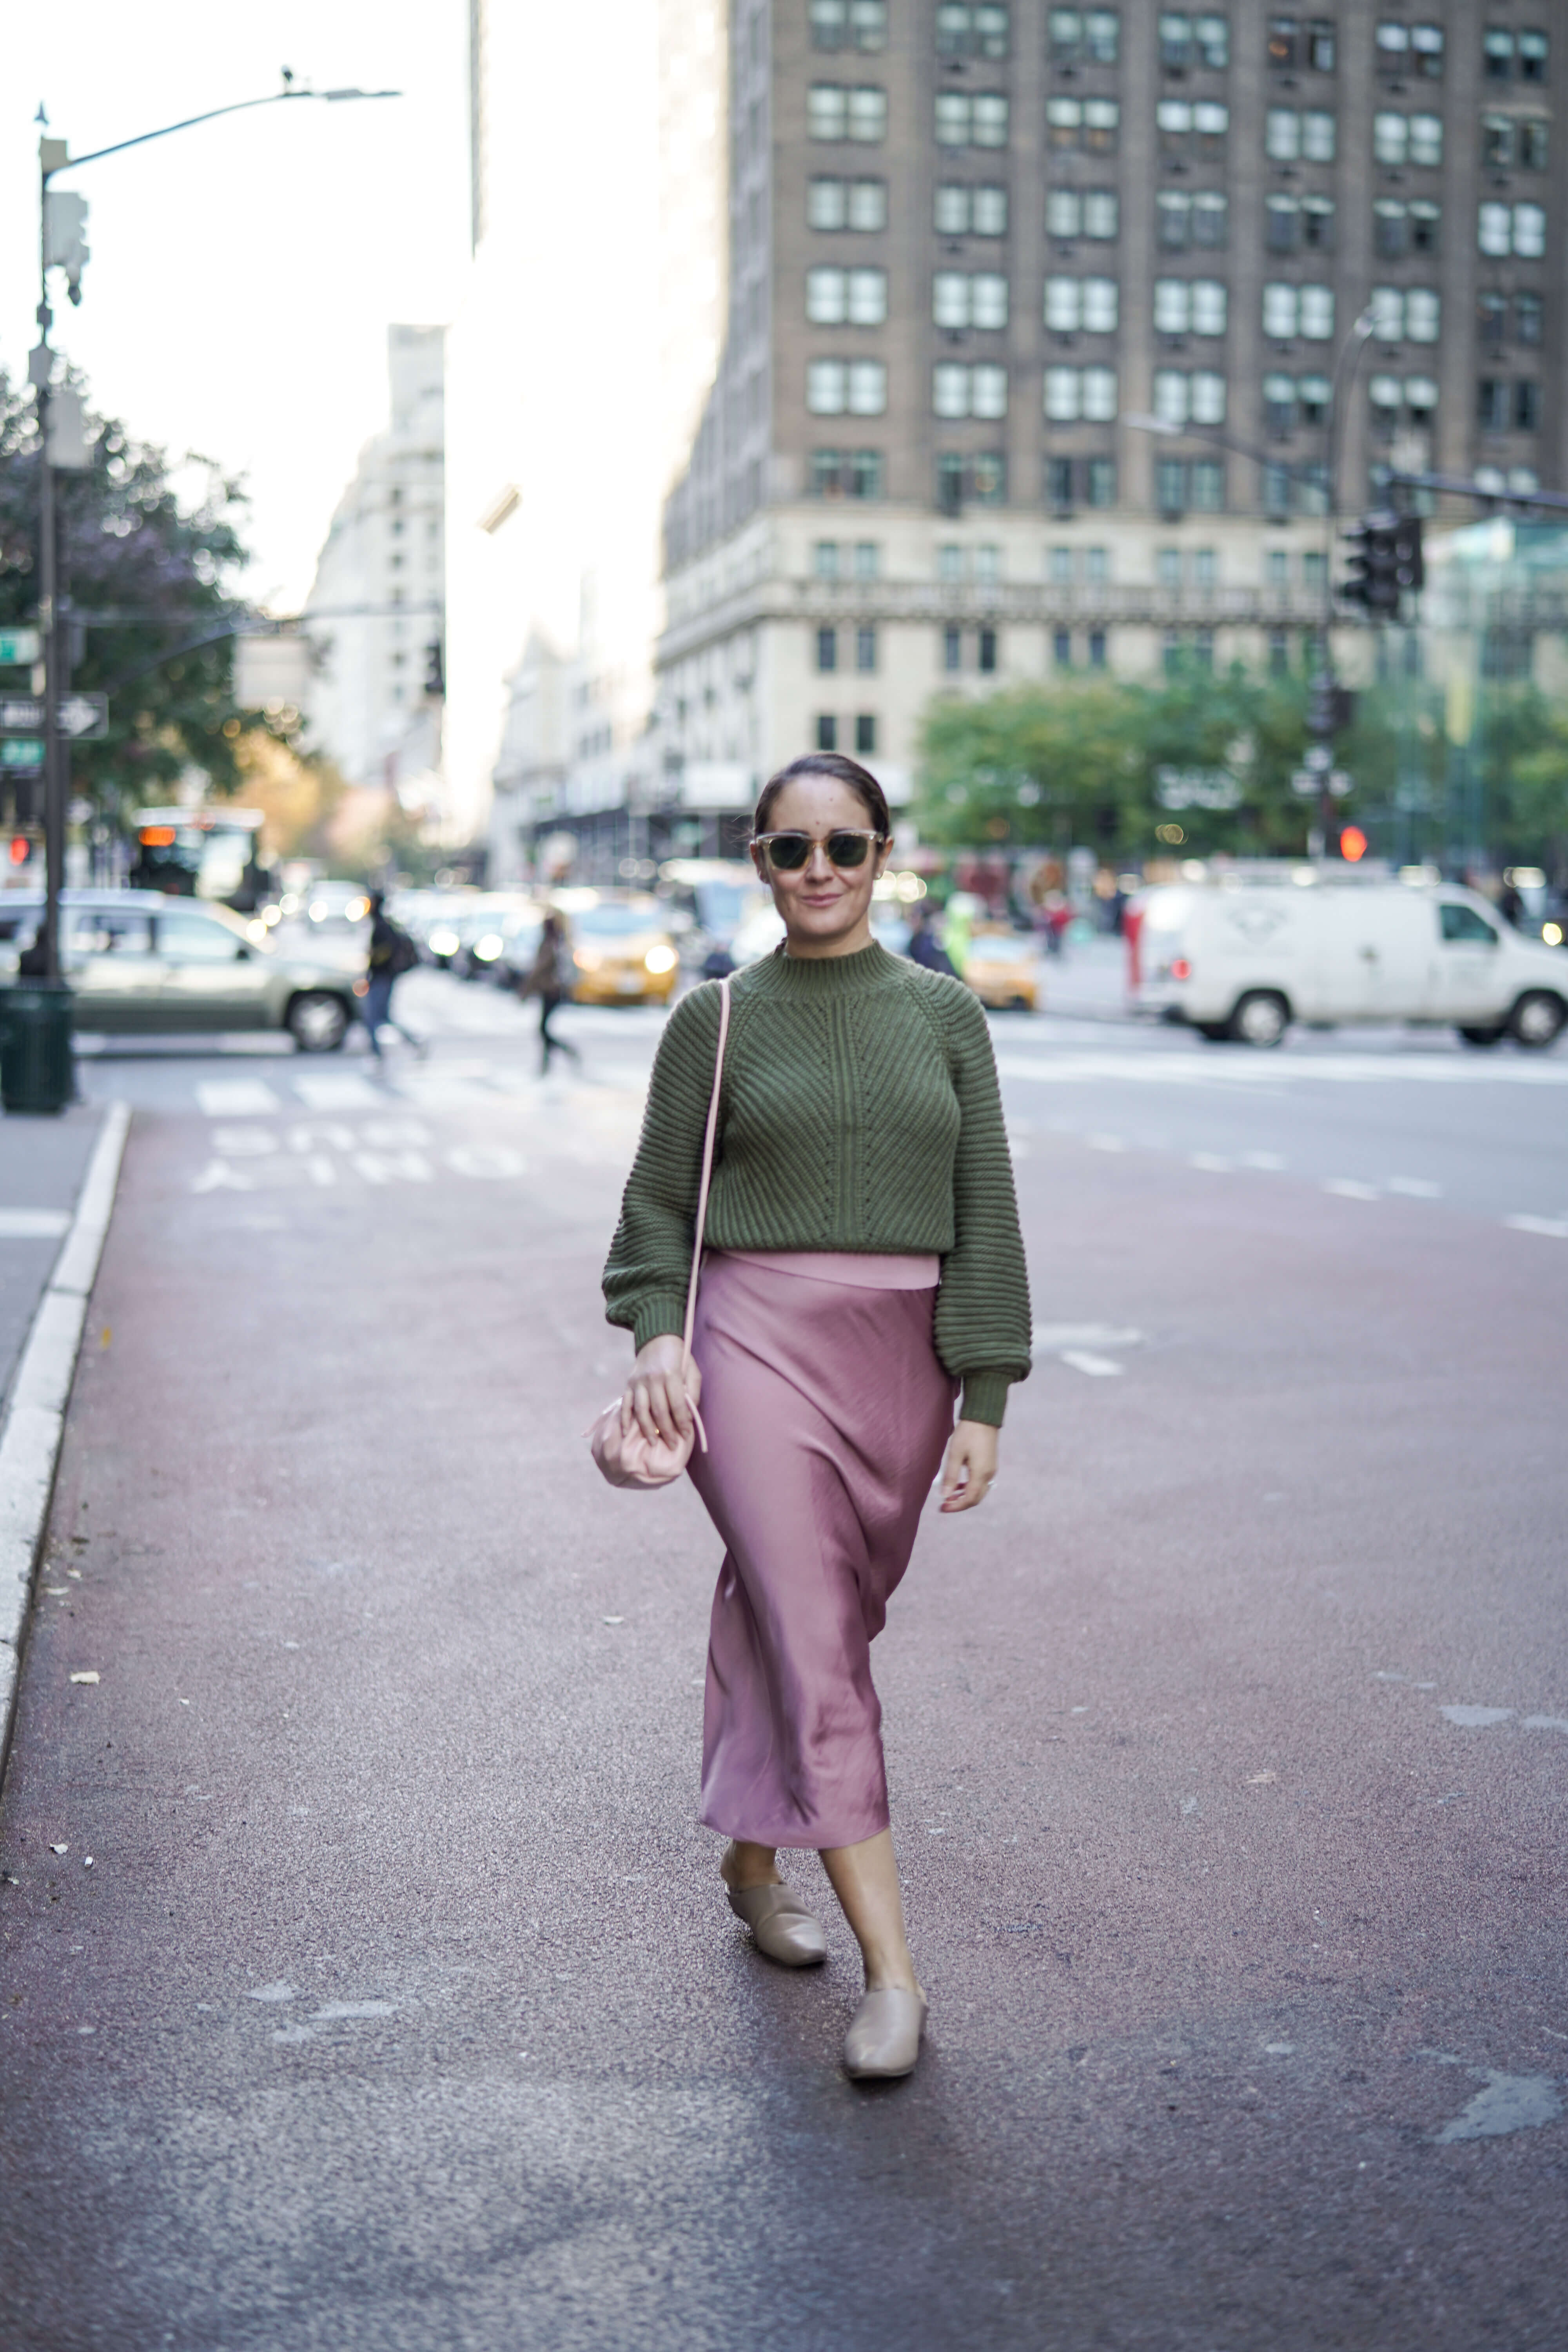 Free People Skirt Tularosa Sweater Mansur Gavriel Bag Coclico Shearling Slides Outfit by Modnitsa Styling